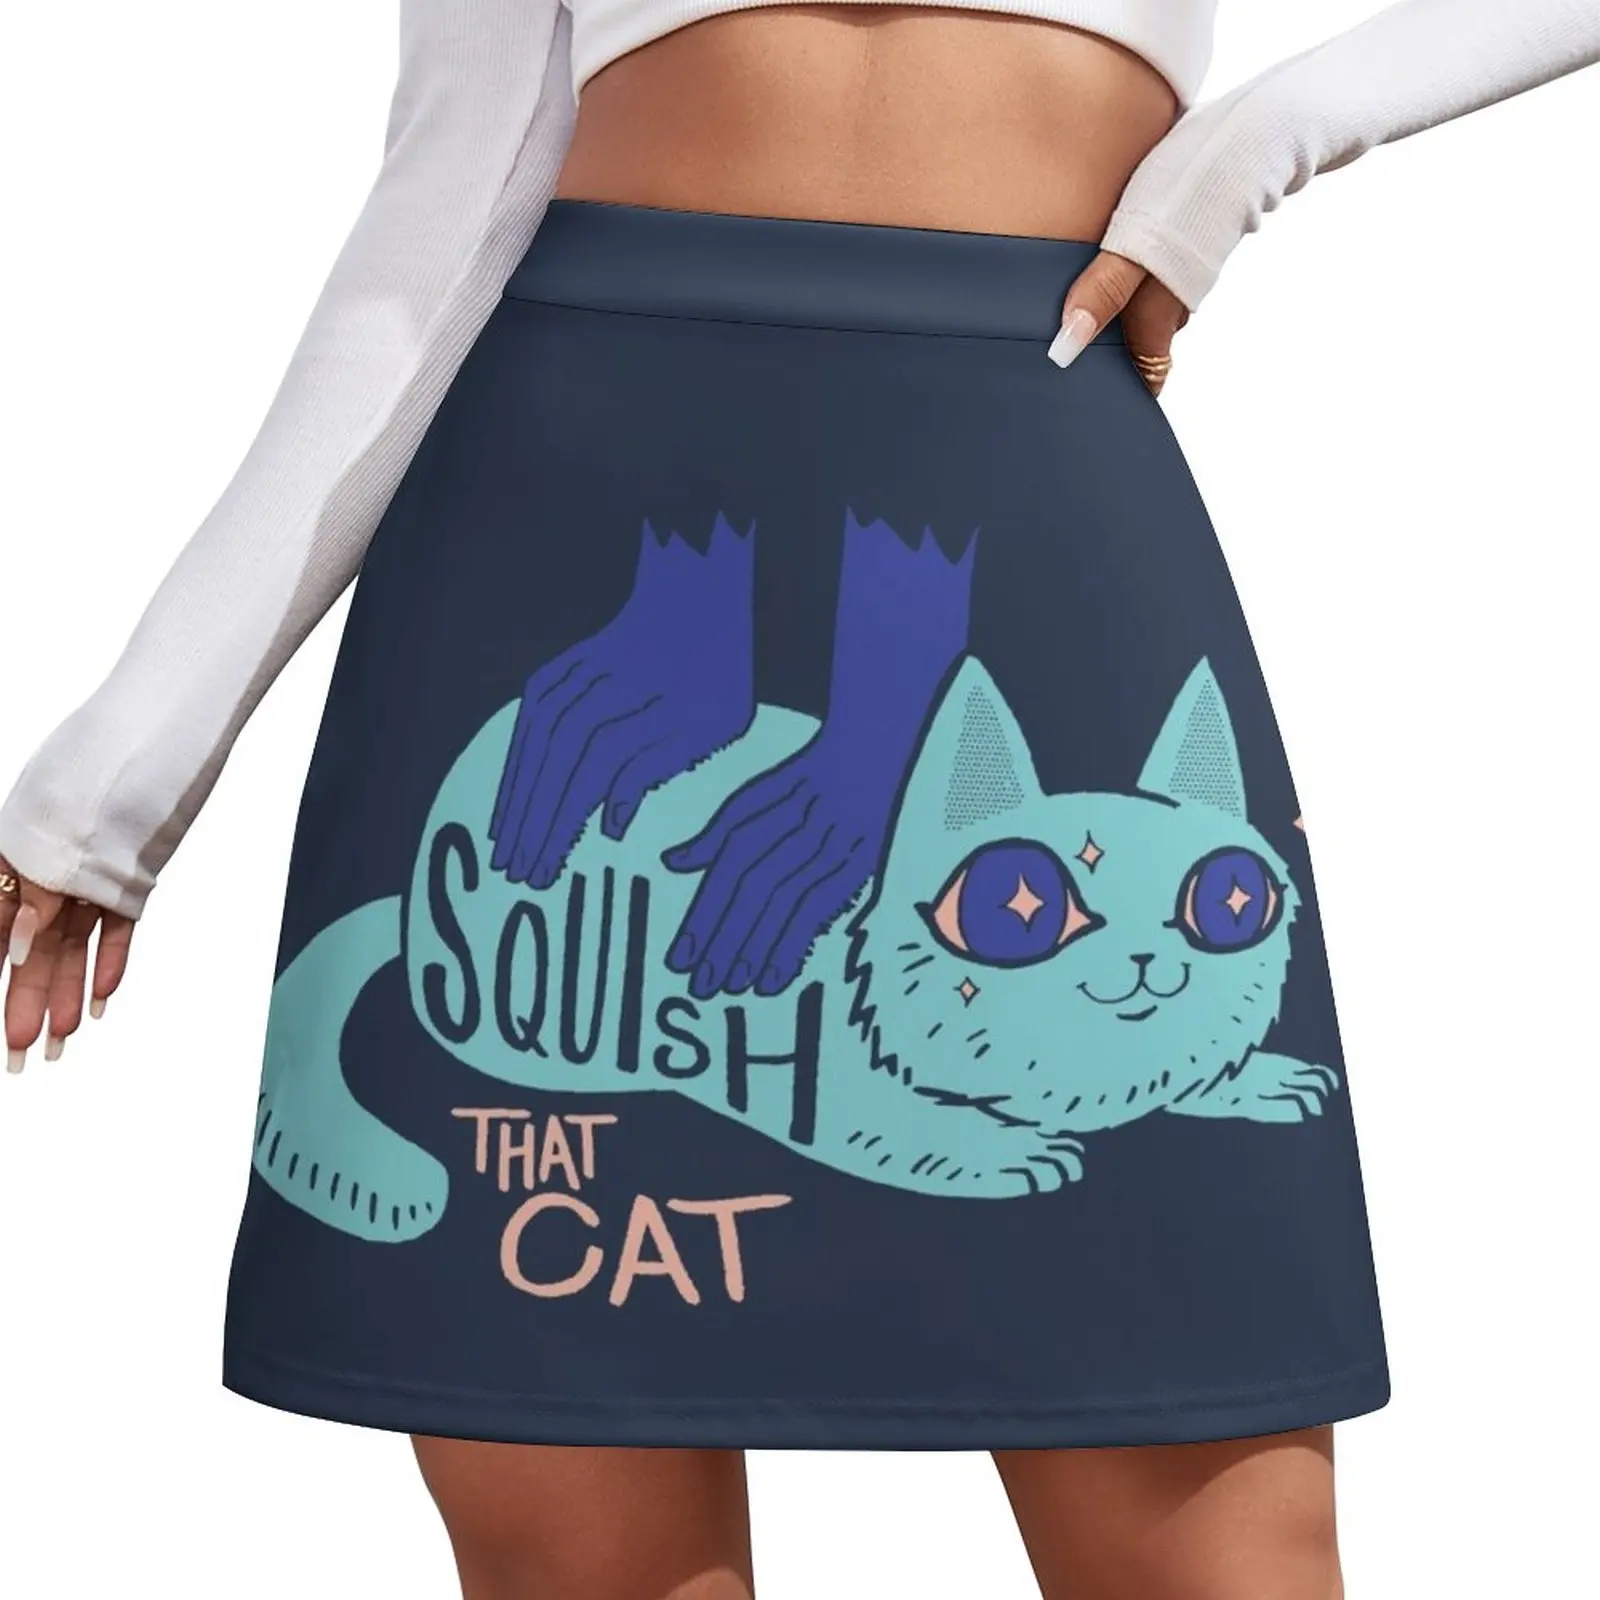 Squish that Cat! Mini Skirt skirt for woman korean style clothes